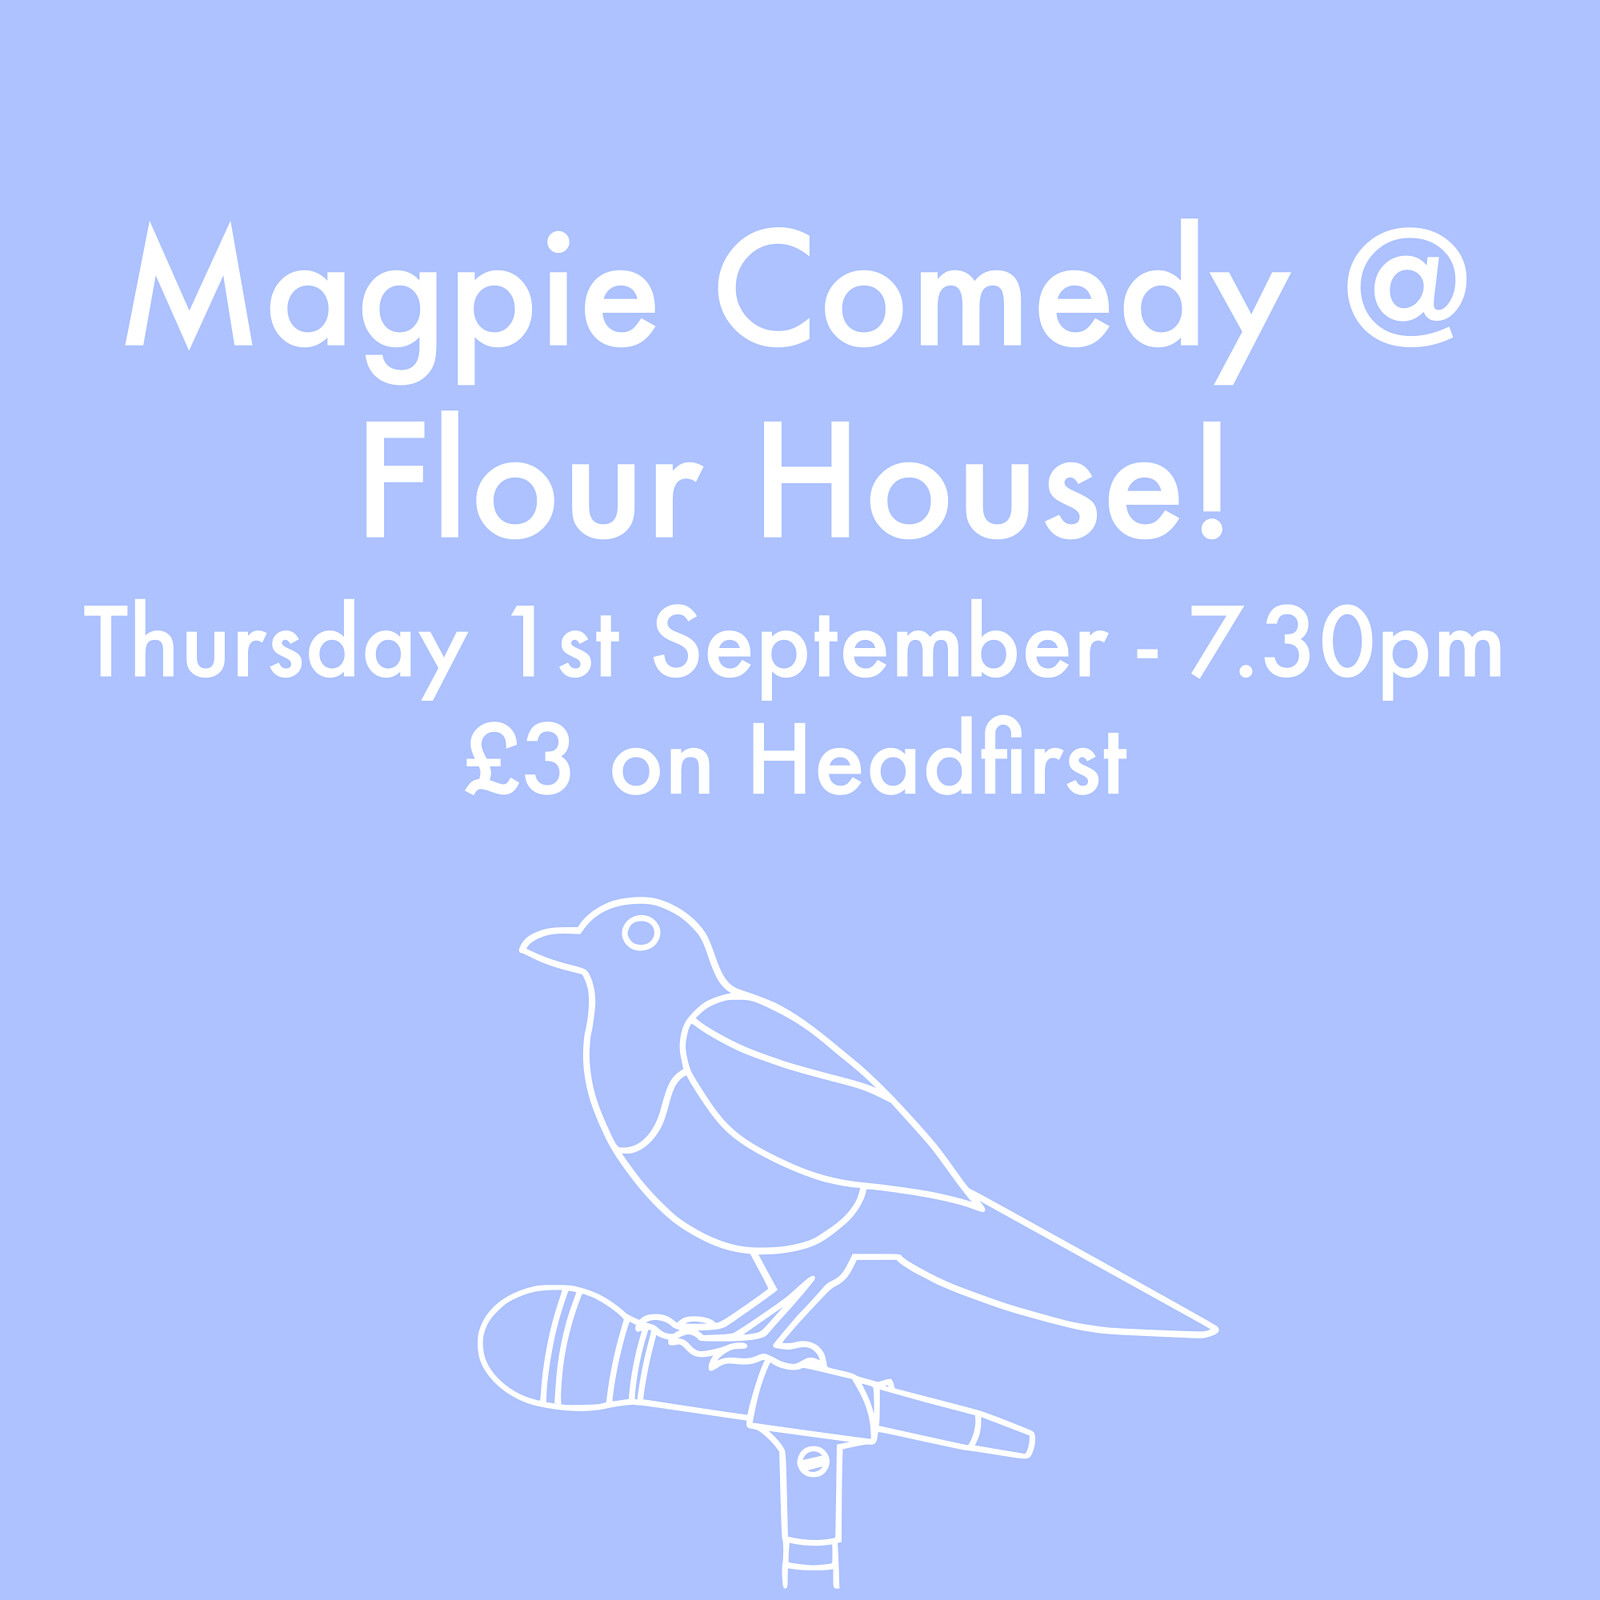 Magpie Comedy at Flour House